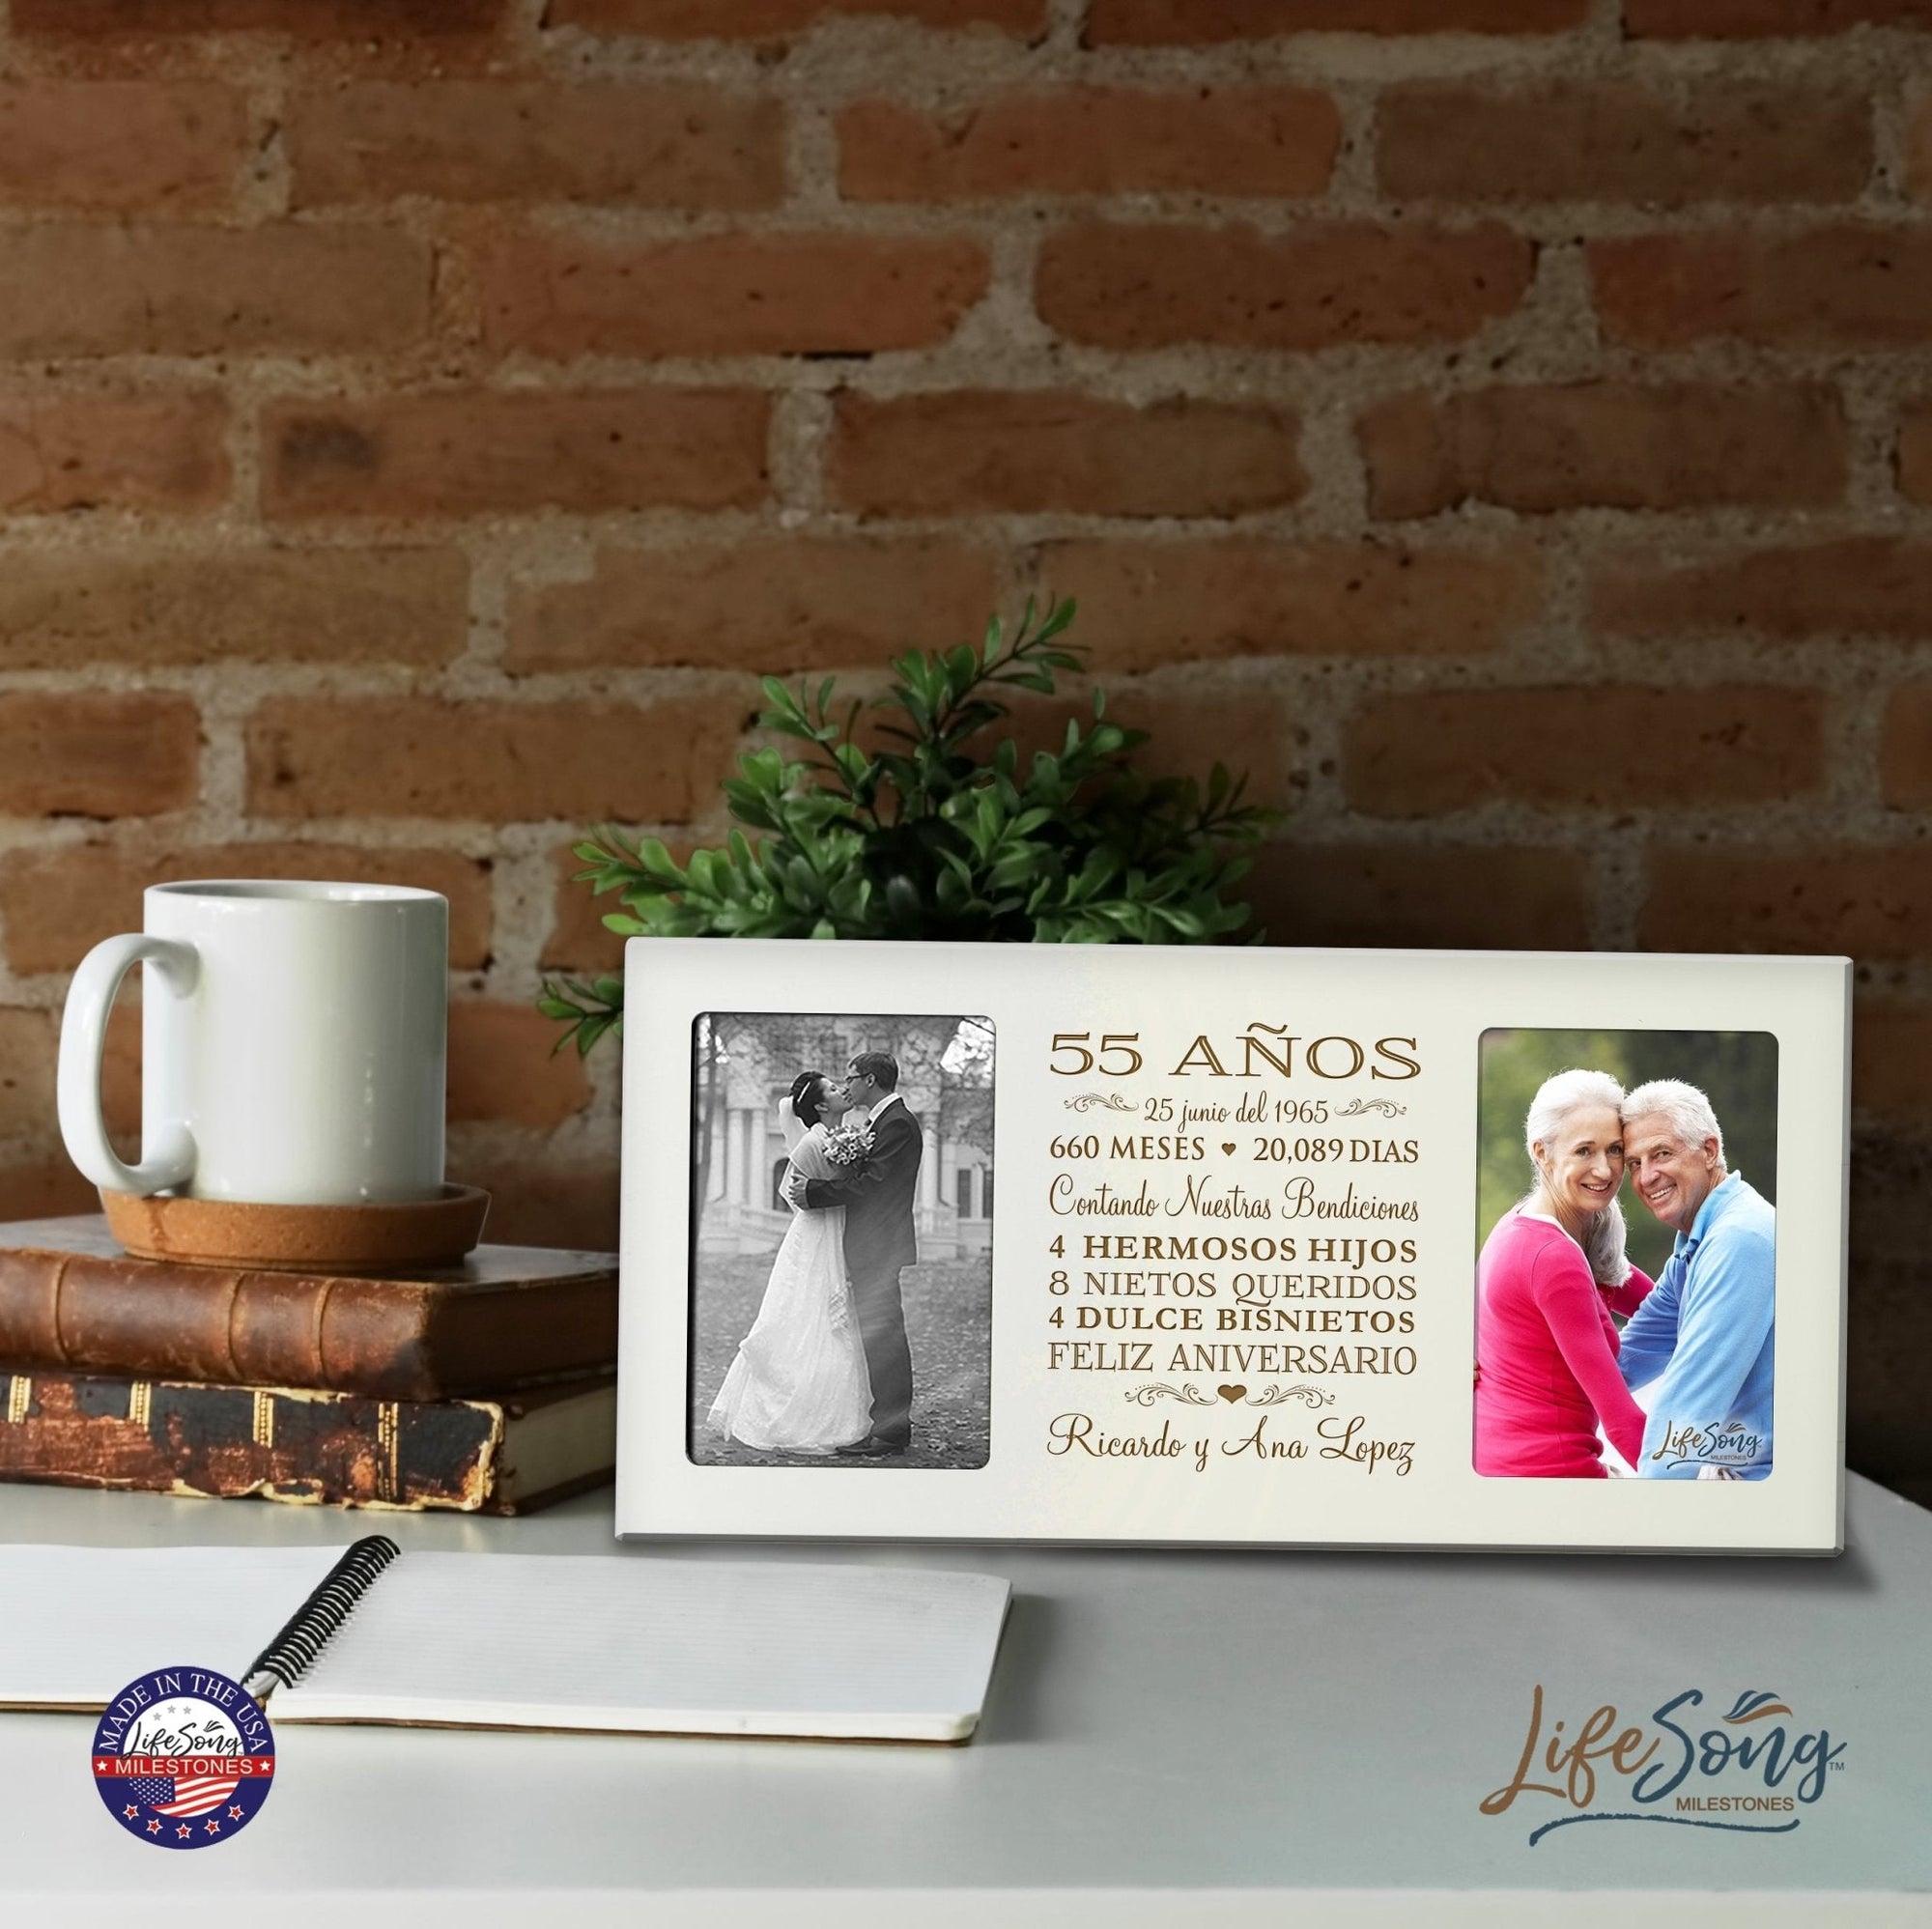 Lifesong Milestones Personalized Couples 55th Wedding Anniversary Spanish Picture Frame